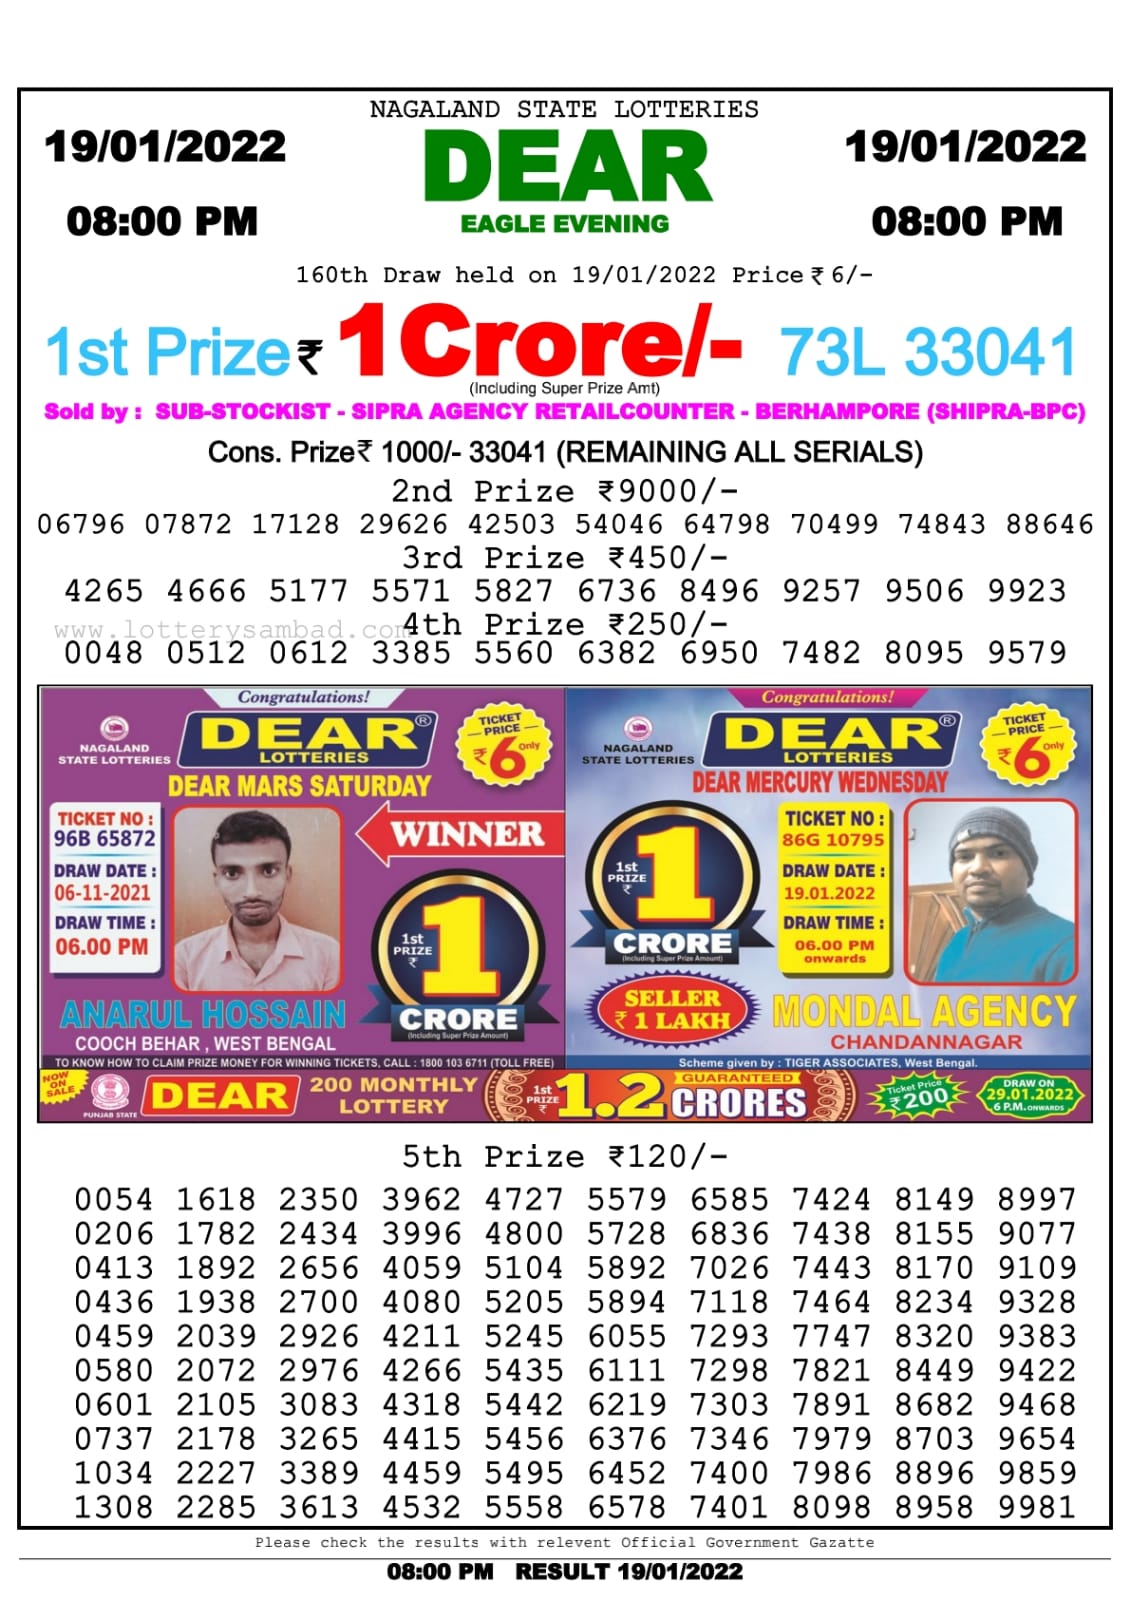 Dear Lottery Nagaland state Lottery Results 8 PM 19.01.2022